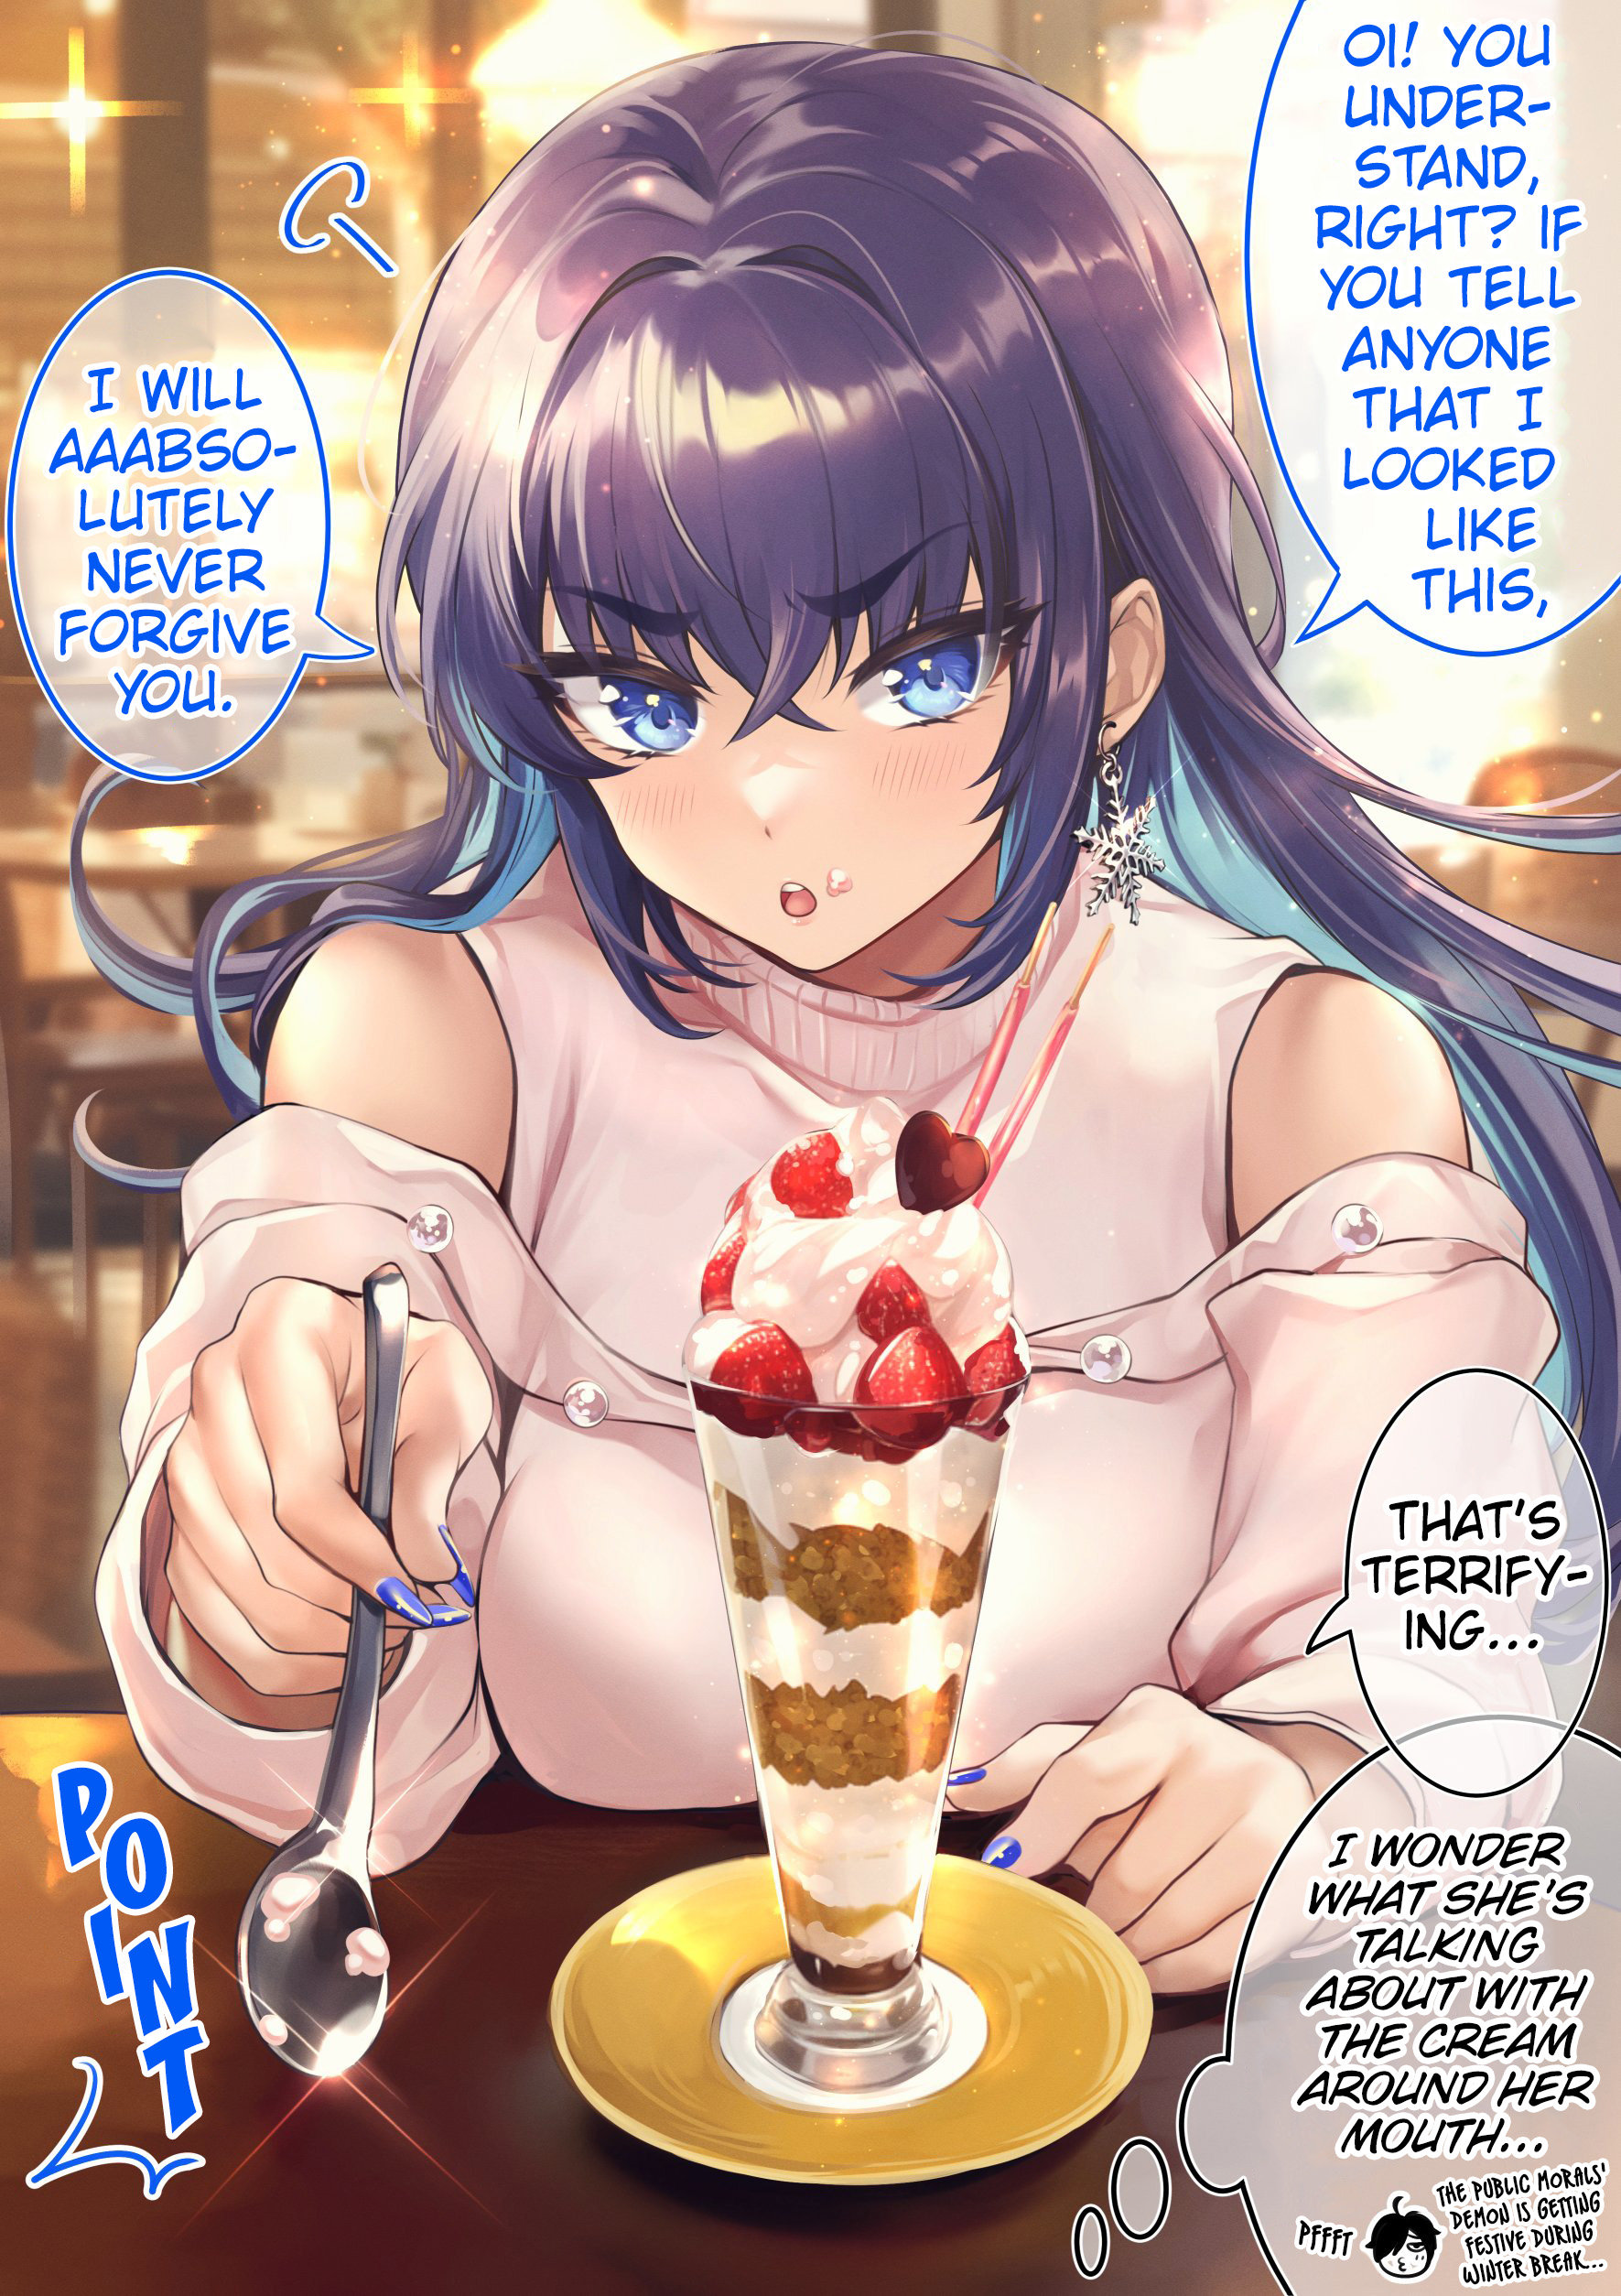 The Public Morals Head Who Becomes A Gyaru Only During Winter Vacation - Page 2